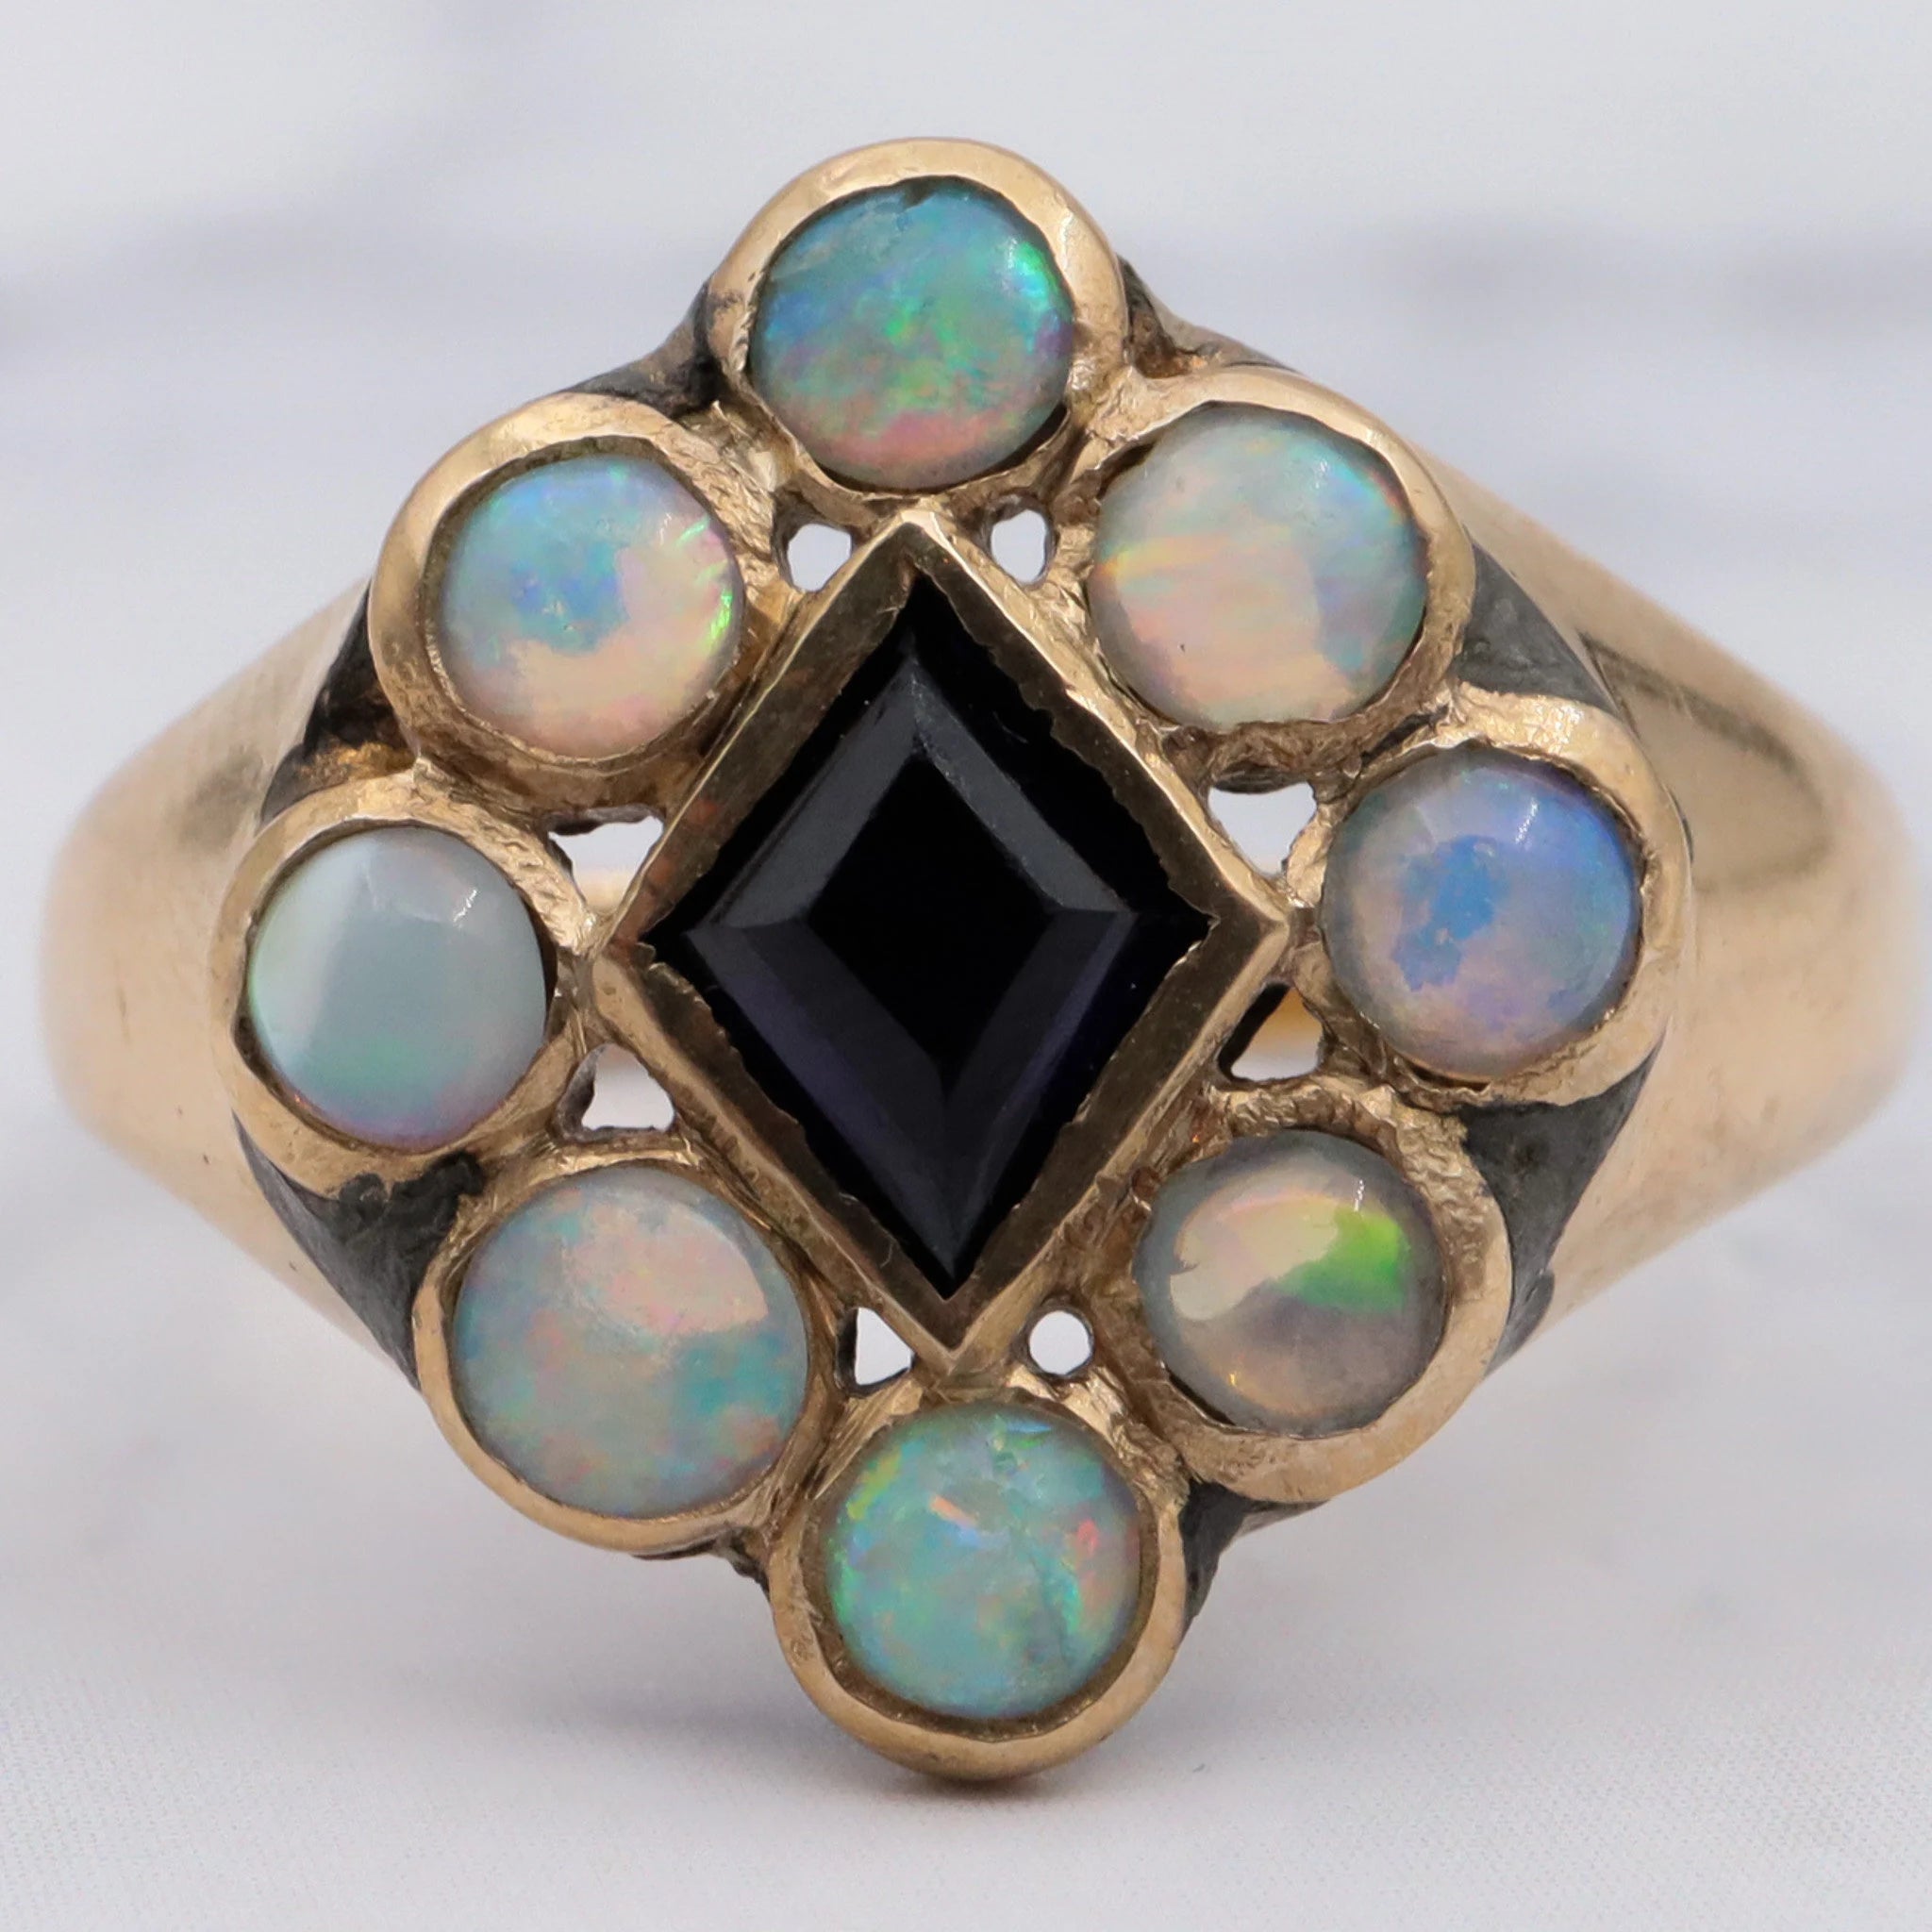 Antique Victorian Opal & Synthetic Sapphire Ring - Size 7